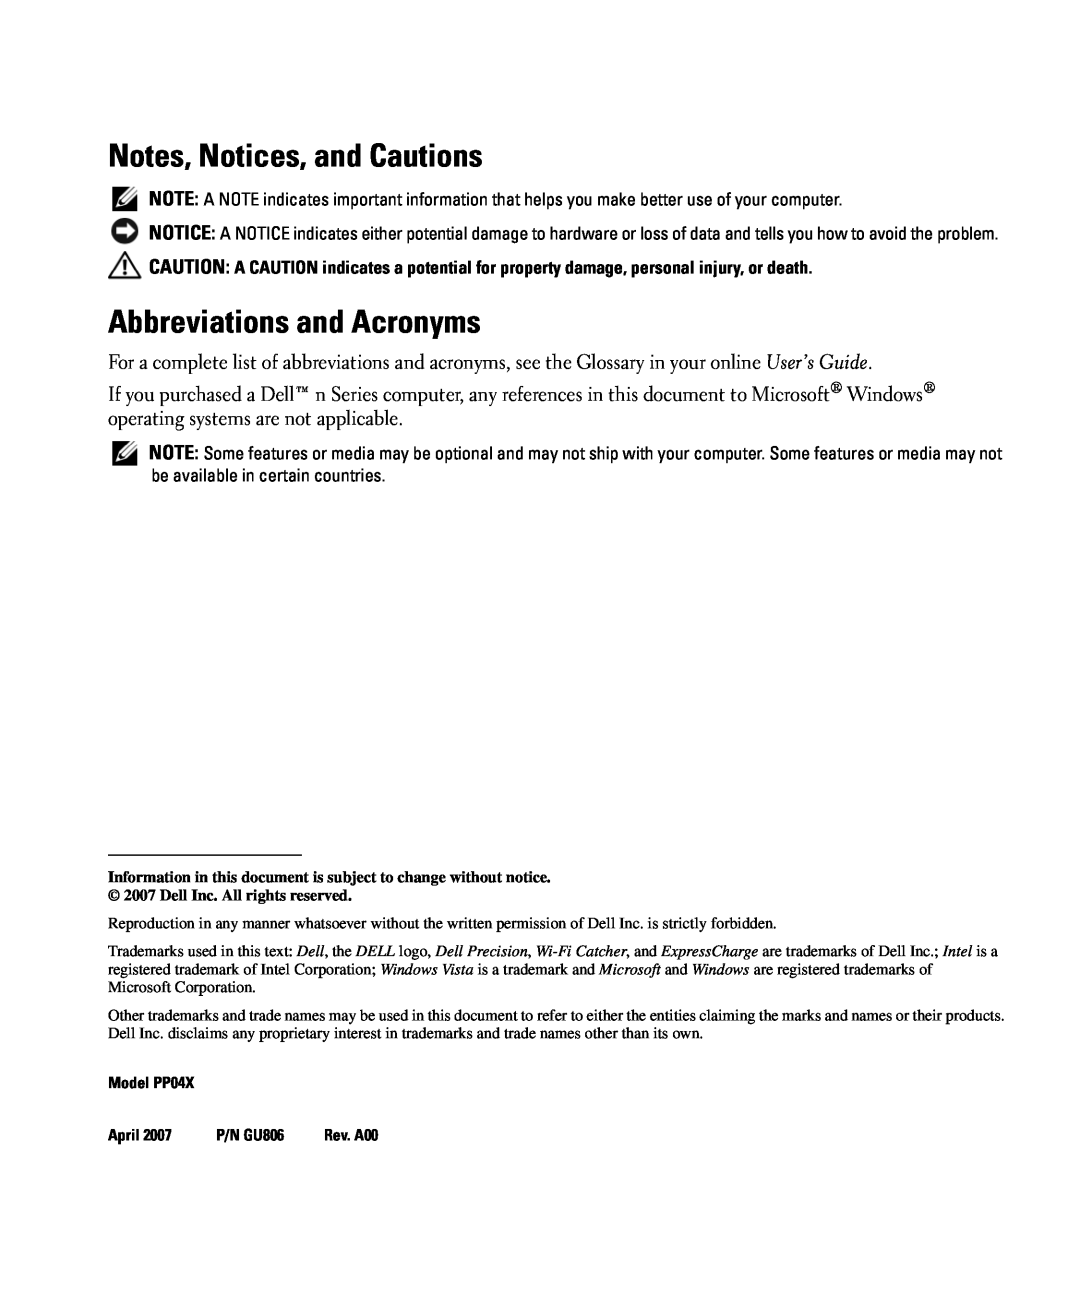 Dell manual Notes, Notices, and Cautions, Abbreviations and Acronyms, Model PP04X, April, P/N GU806 